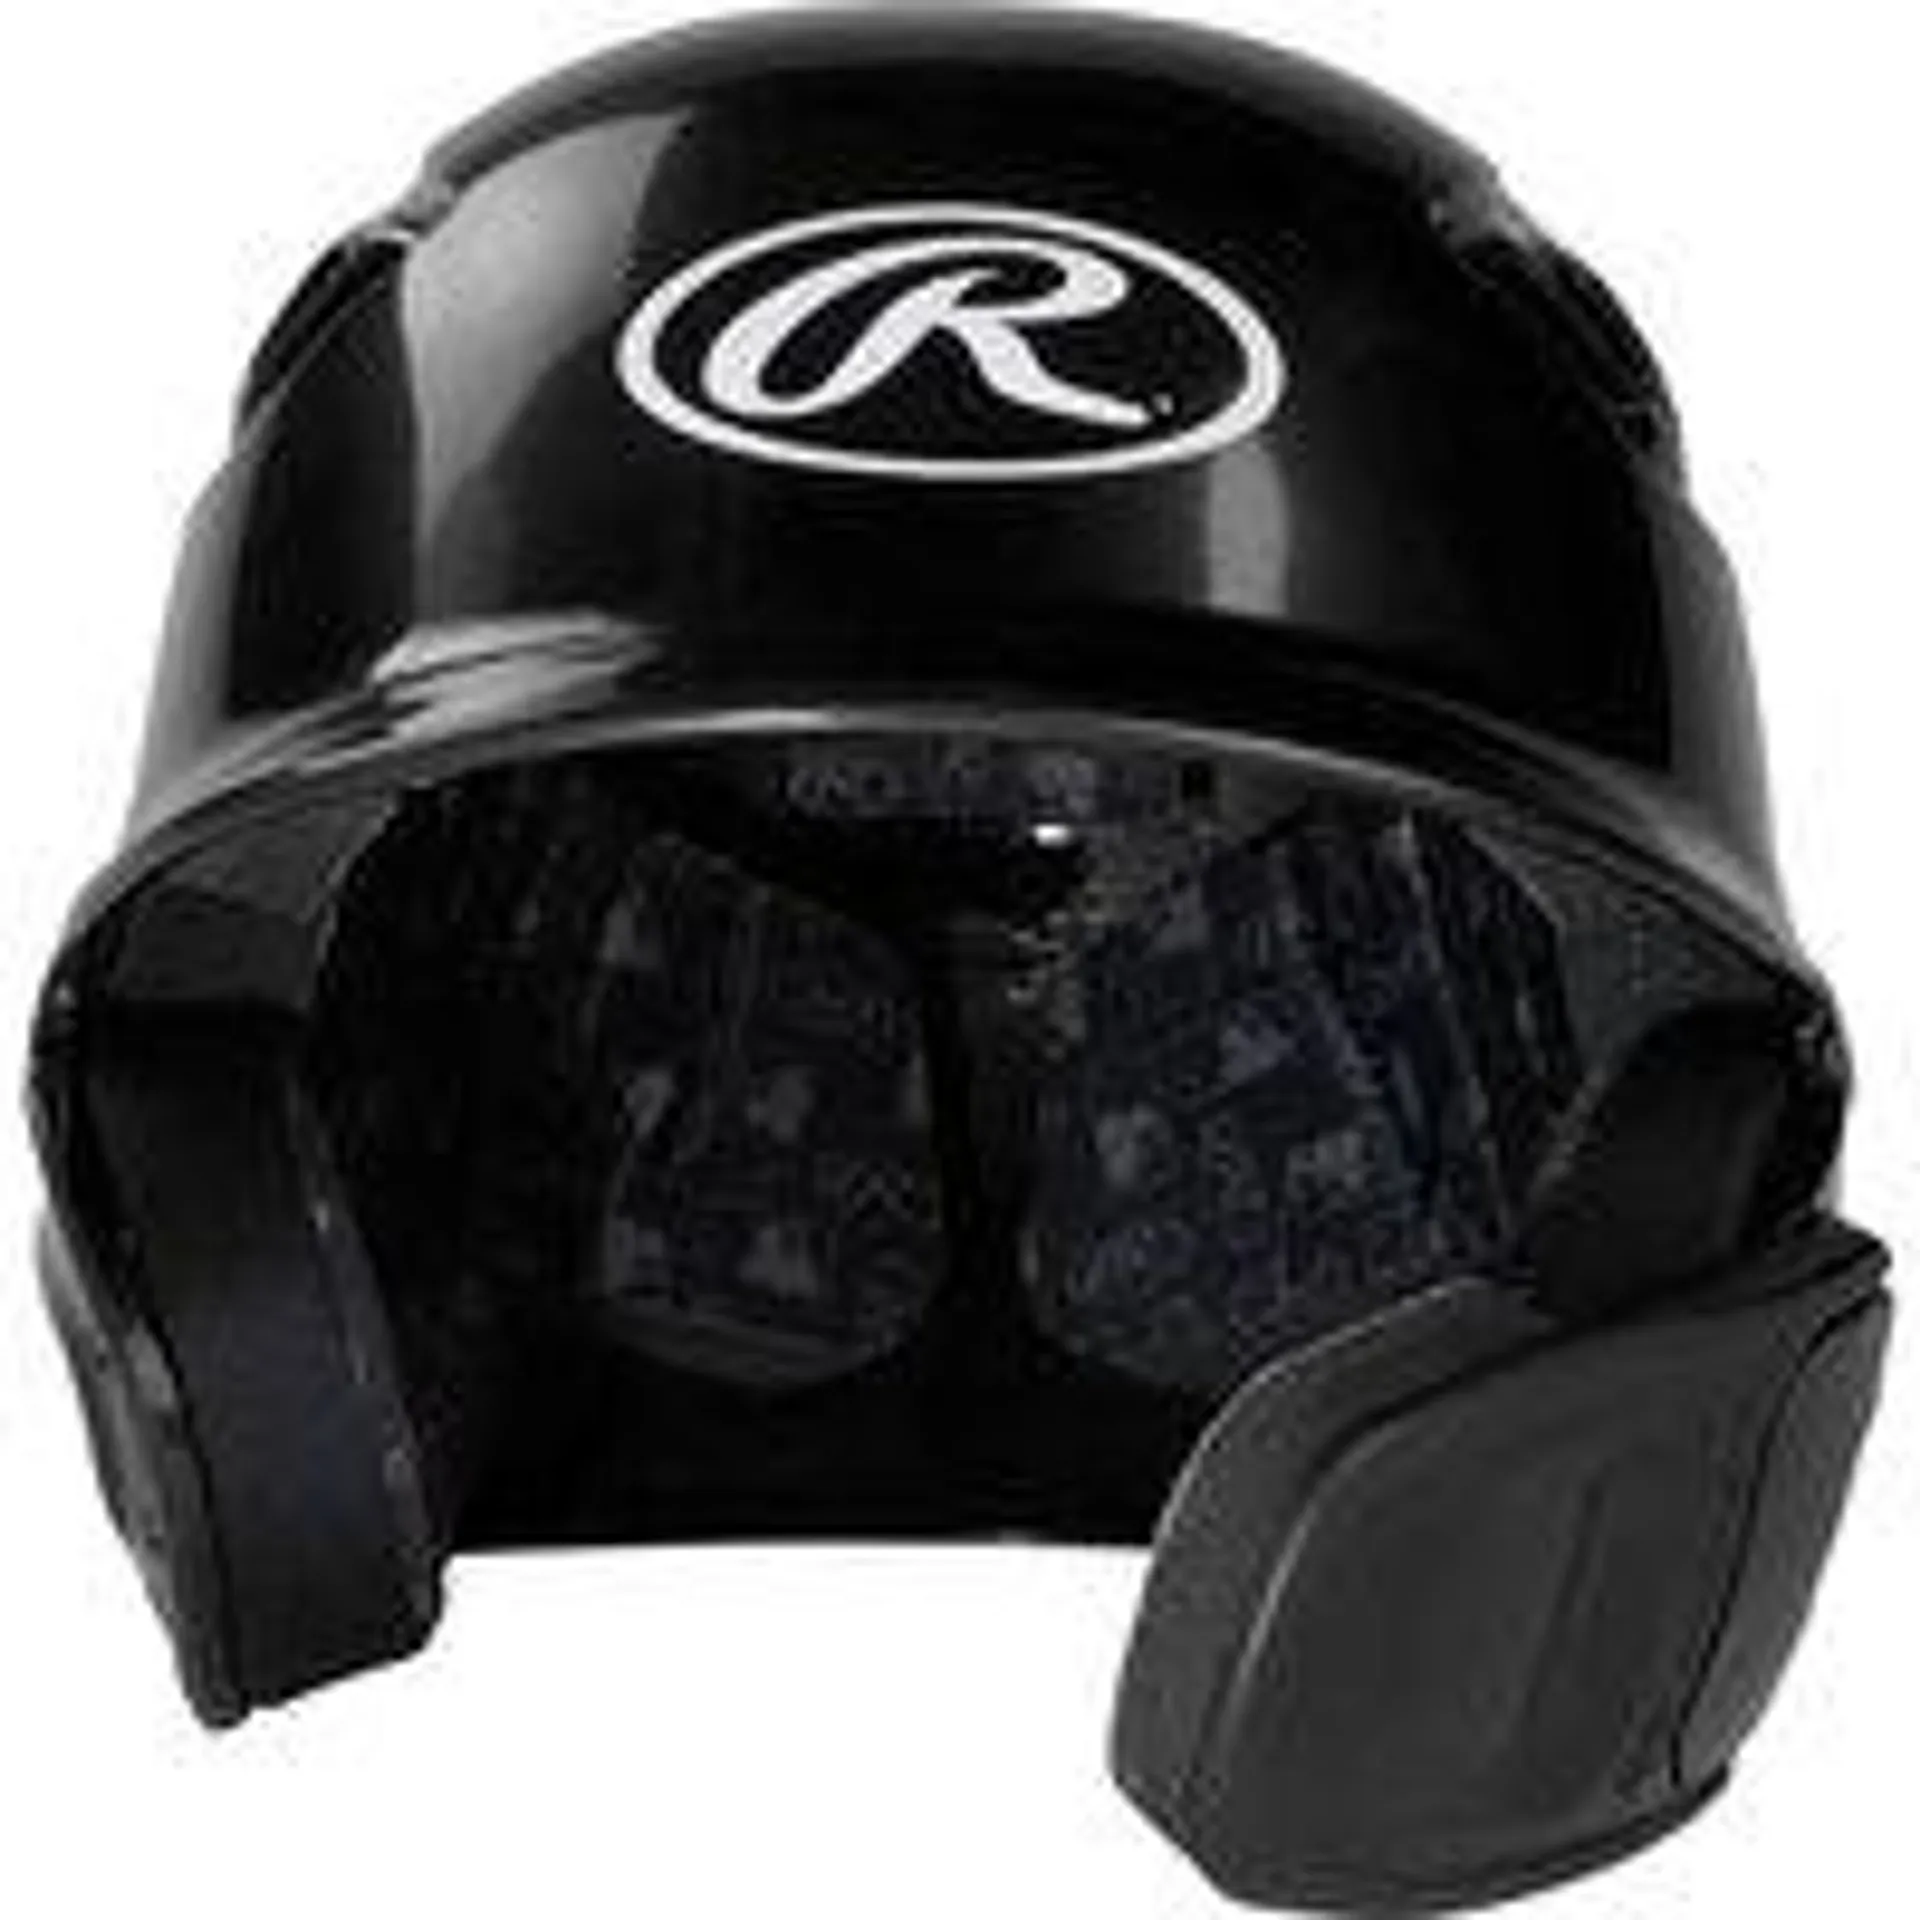 Rawlings Youth R16 Reversible Extension Batting Helmet with Jaw Guard